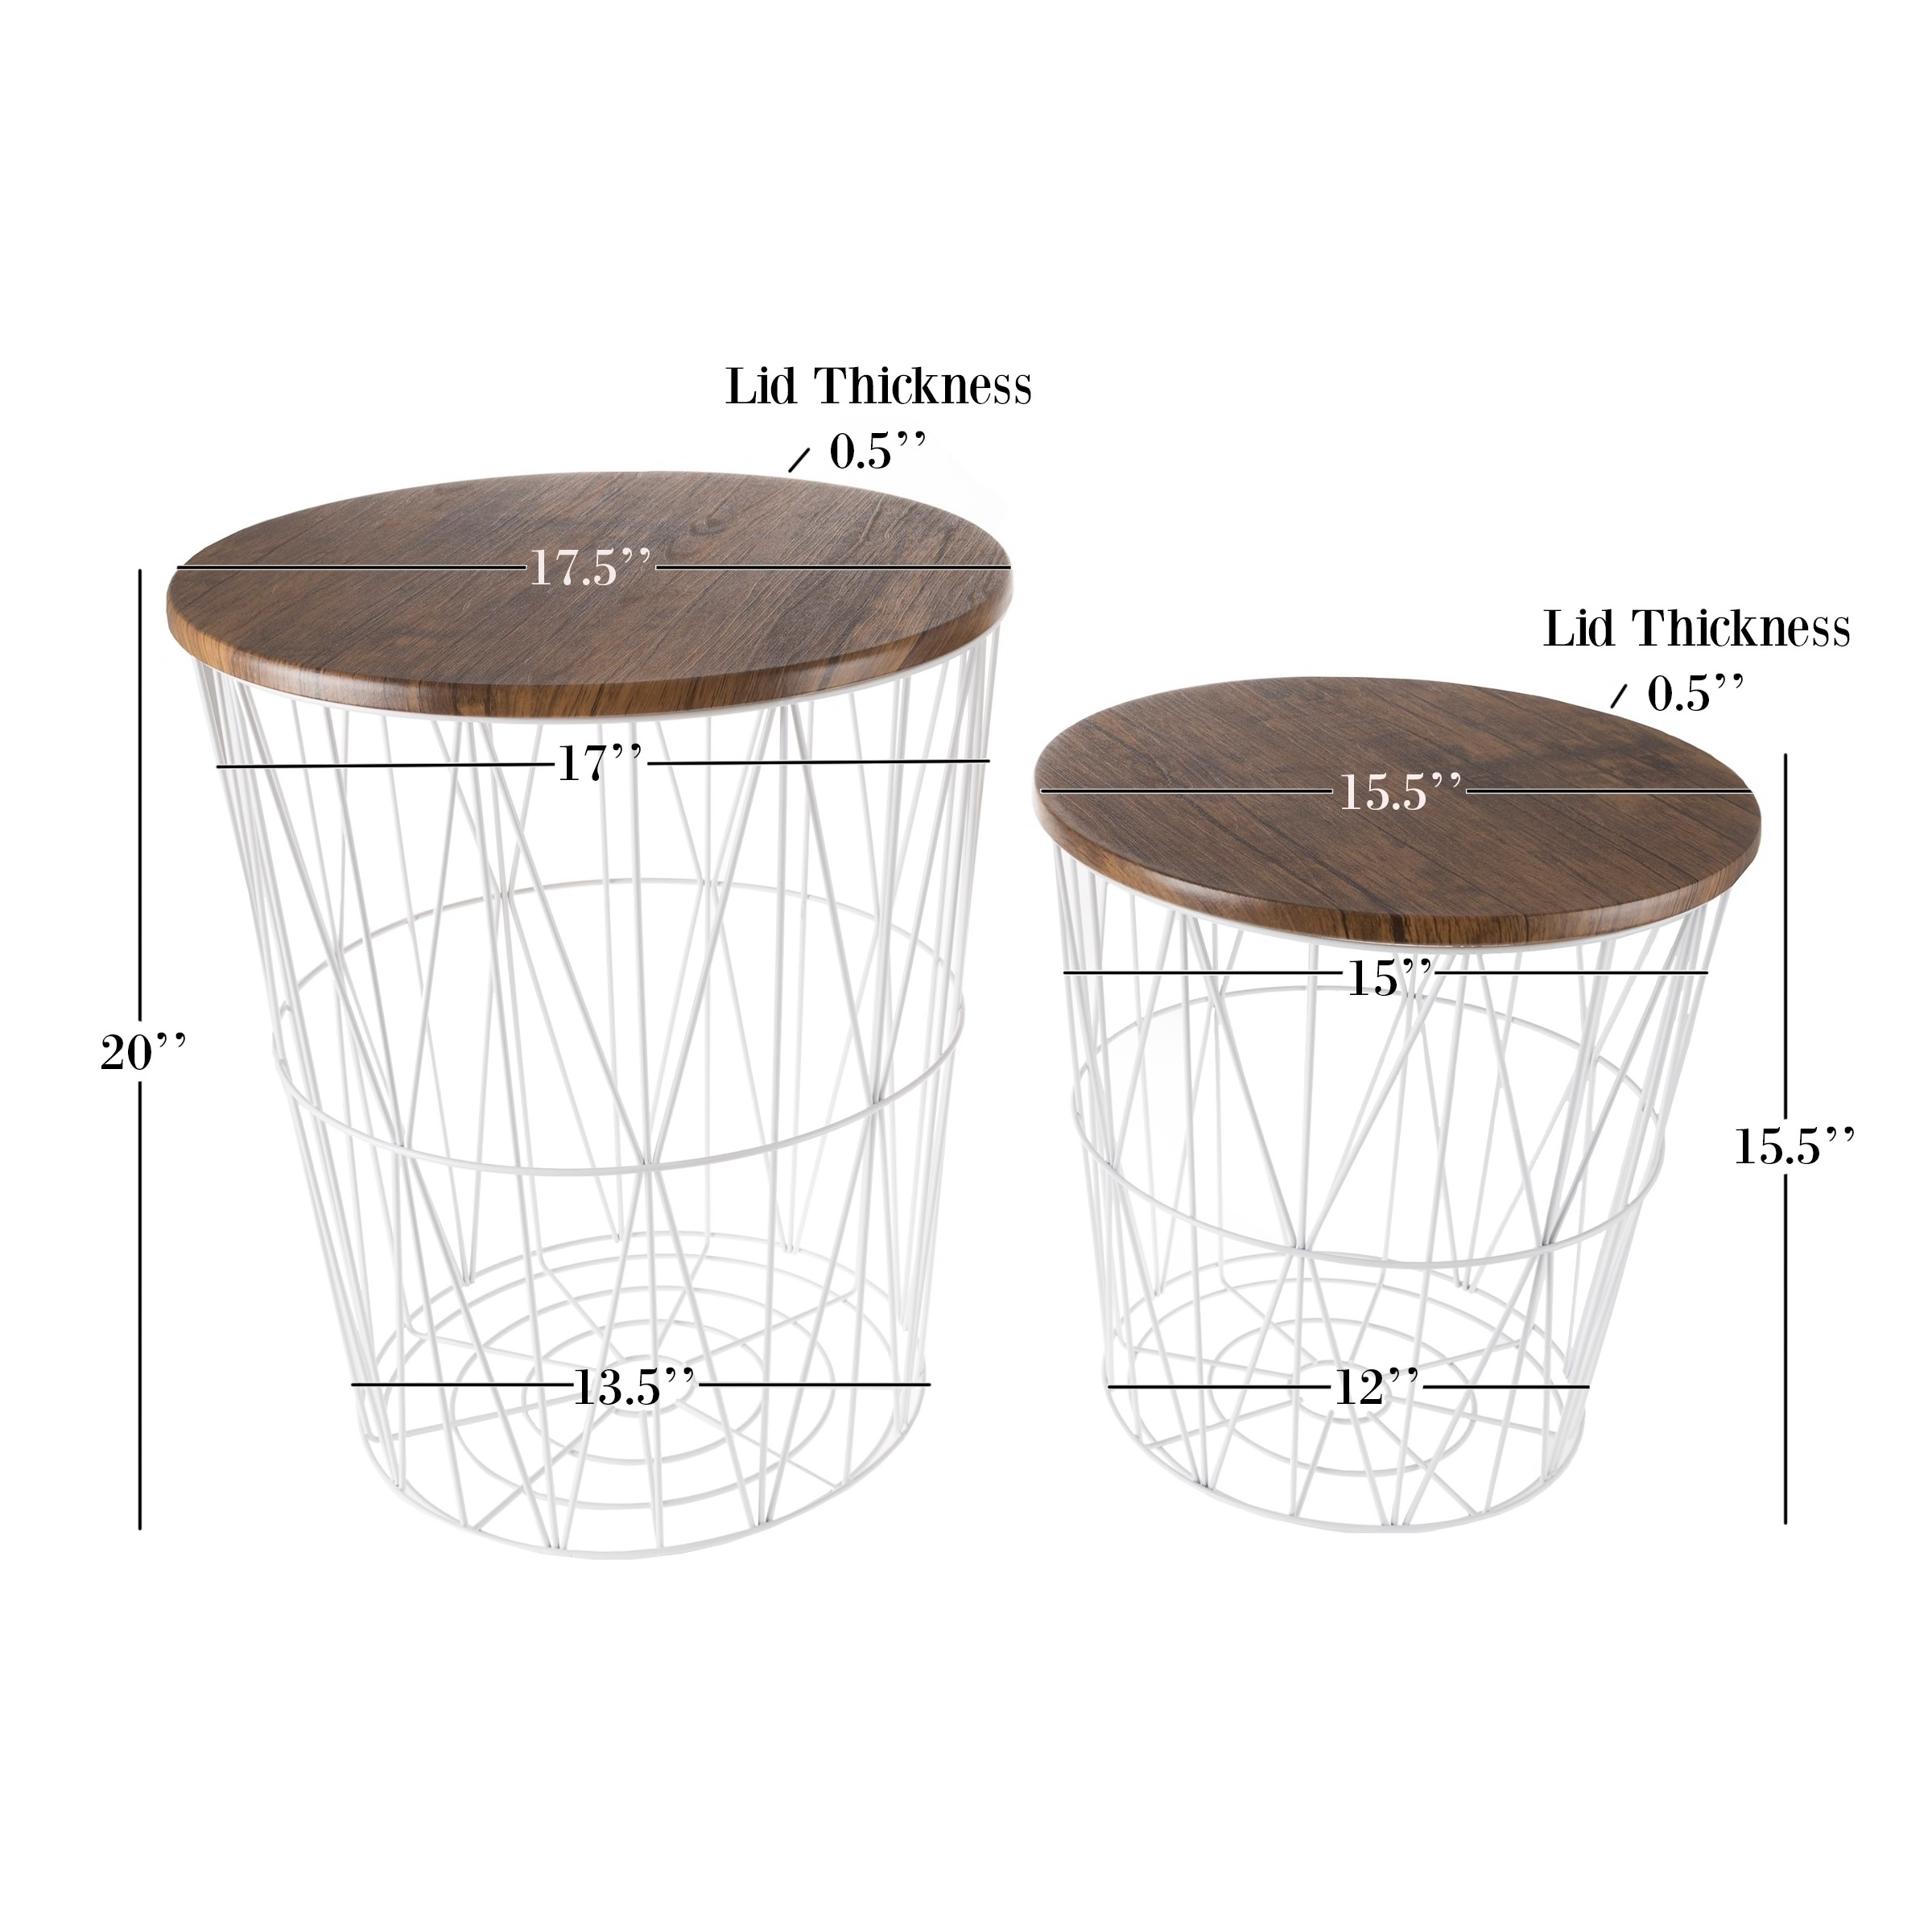 nesting end tables with storage set convertible round metal basket veneer wood top accent side lavish home table black room essentials free shipping today tro lamps goods curtains